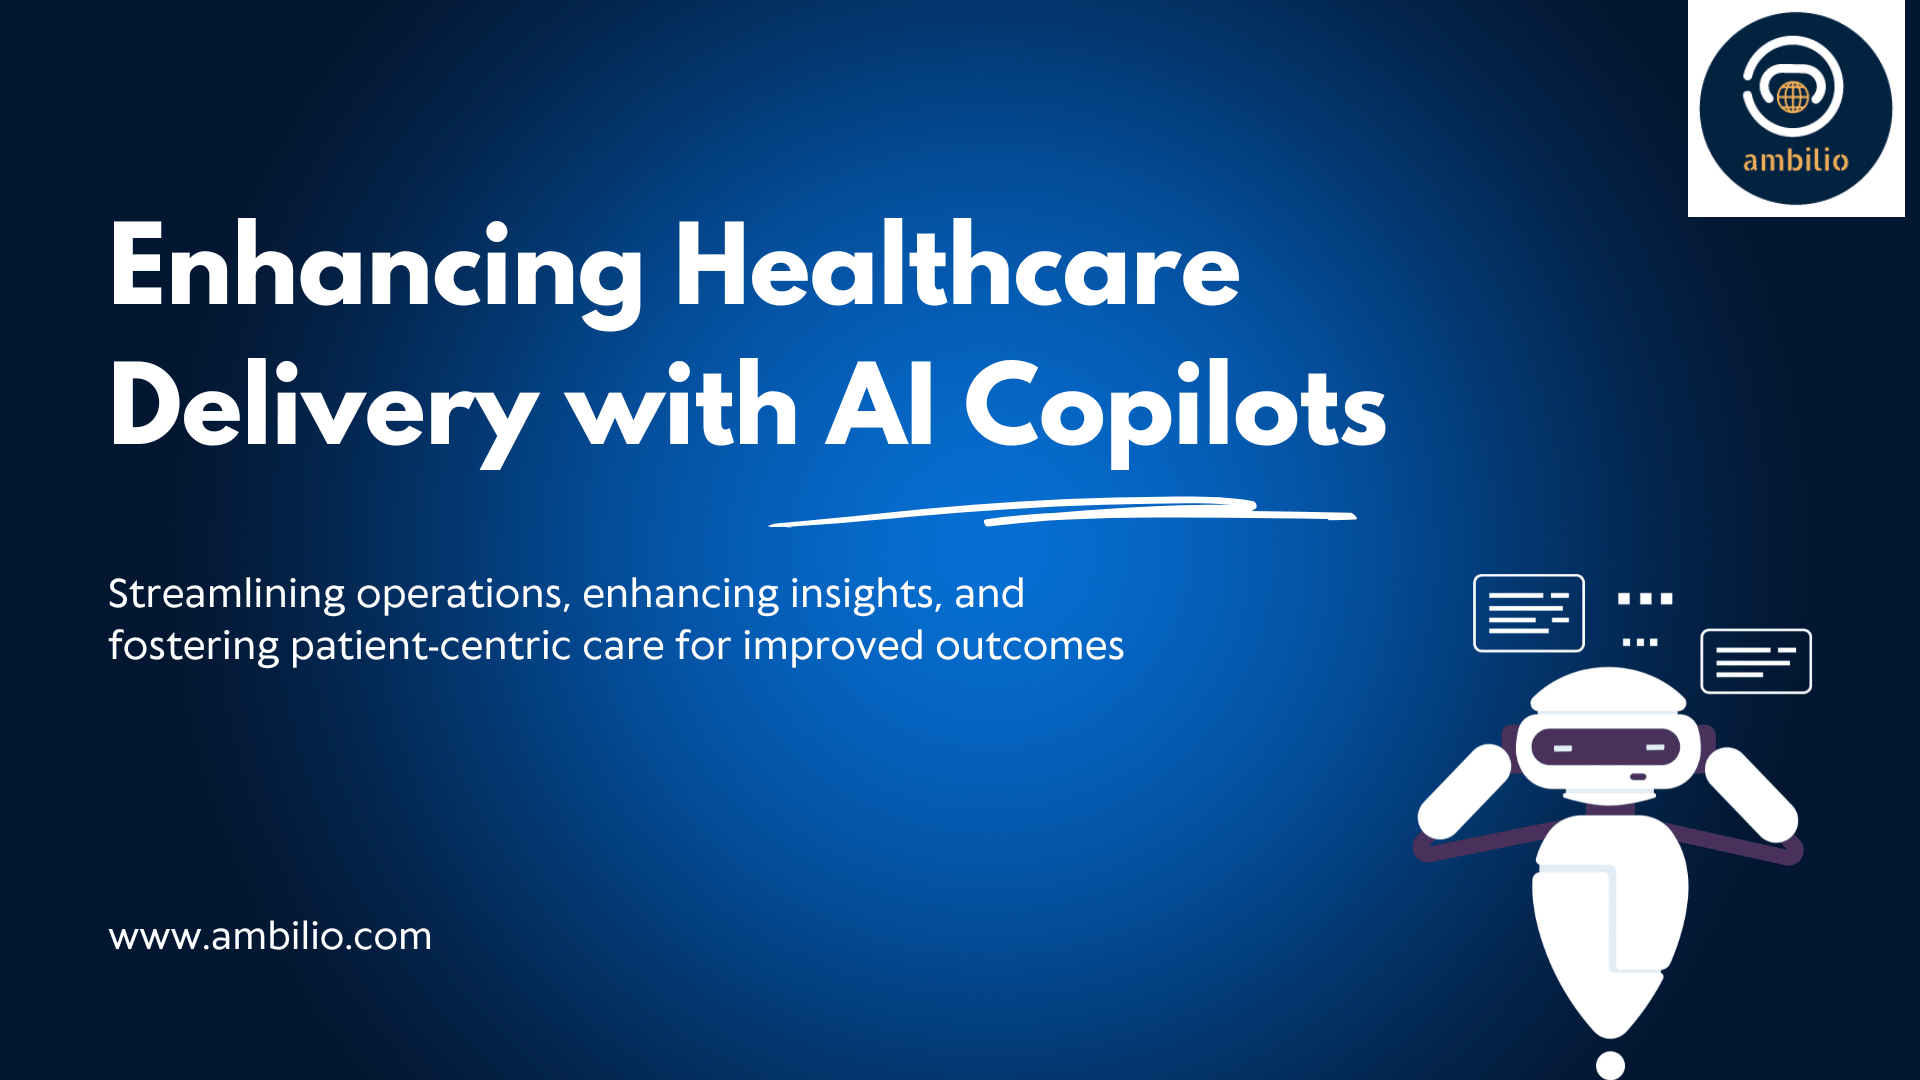 Enhancing Healthcare Delivery with AI Copilots